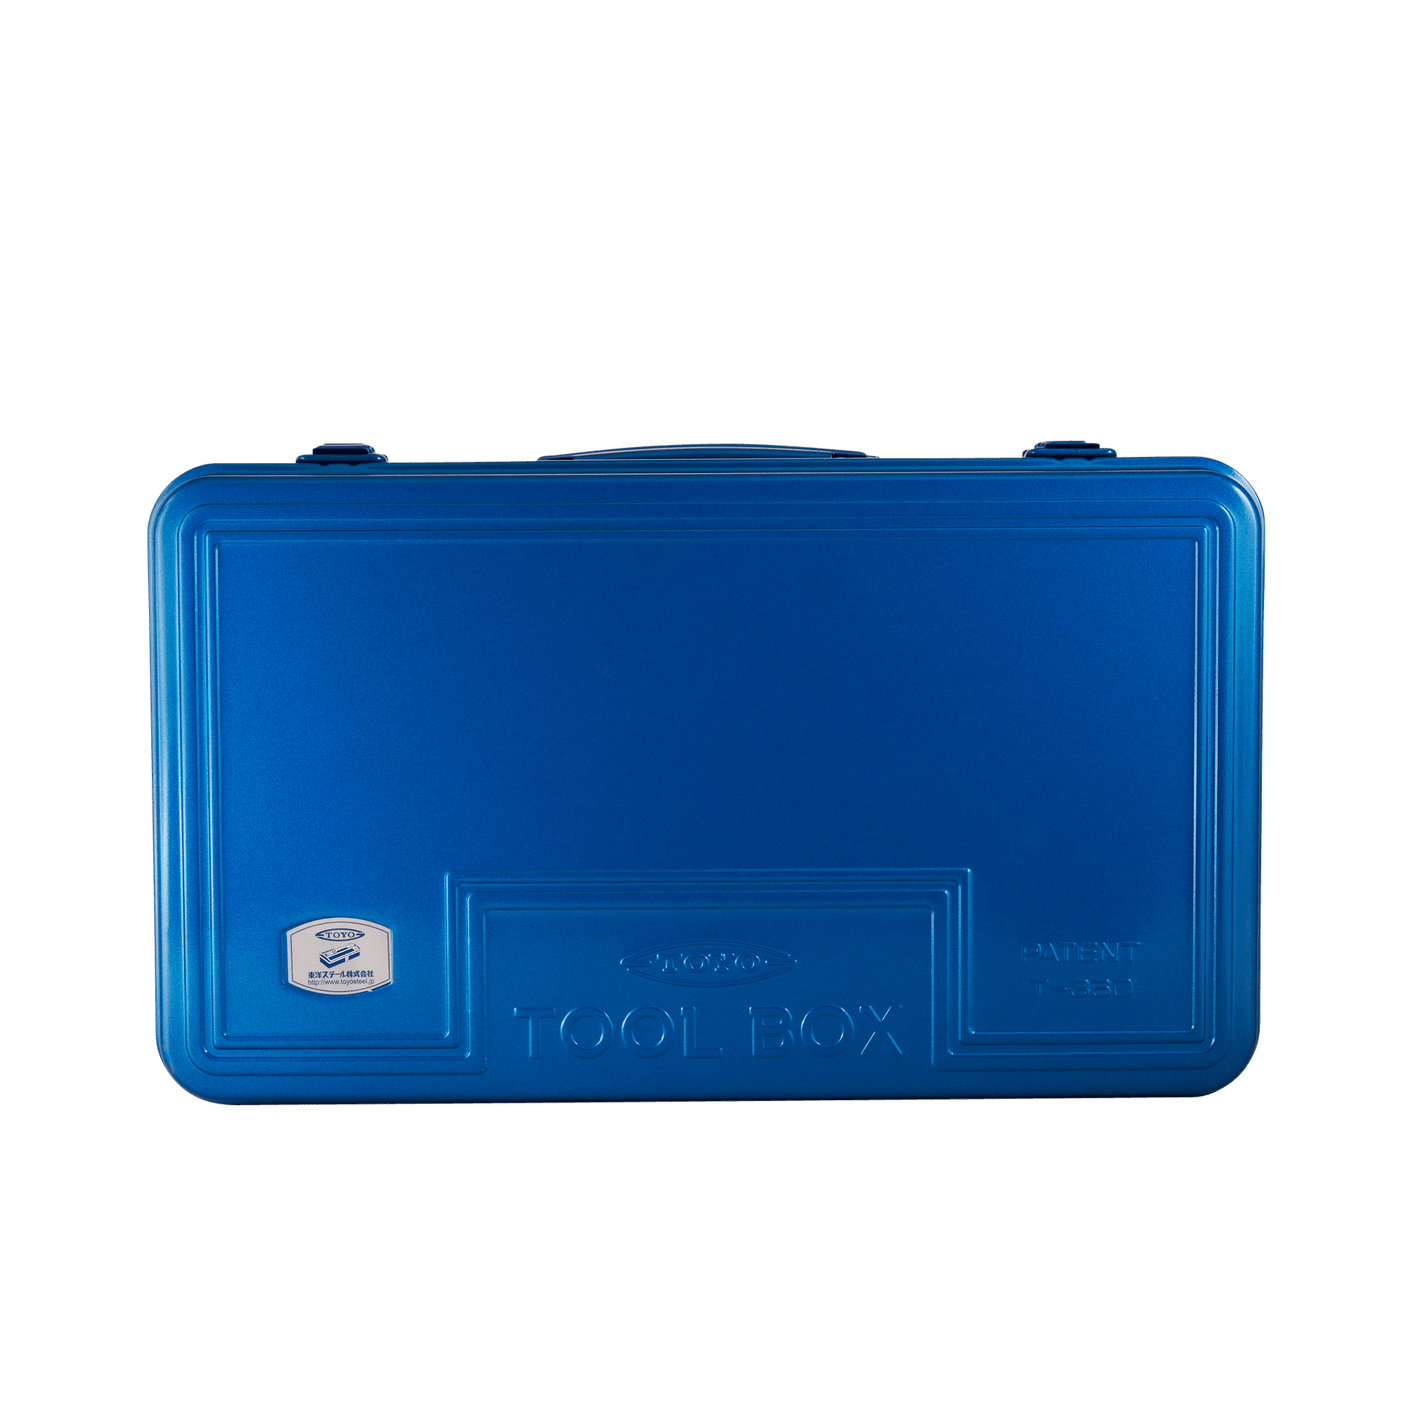 TOYO Trunk Shape Toolbox T-360 B (Blue) - Tool Bags Boxes and Rolls - Japanese Tools Australia